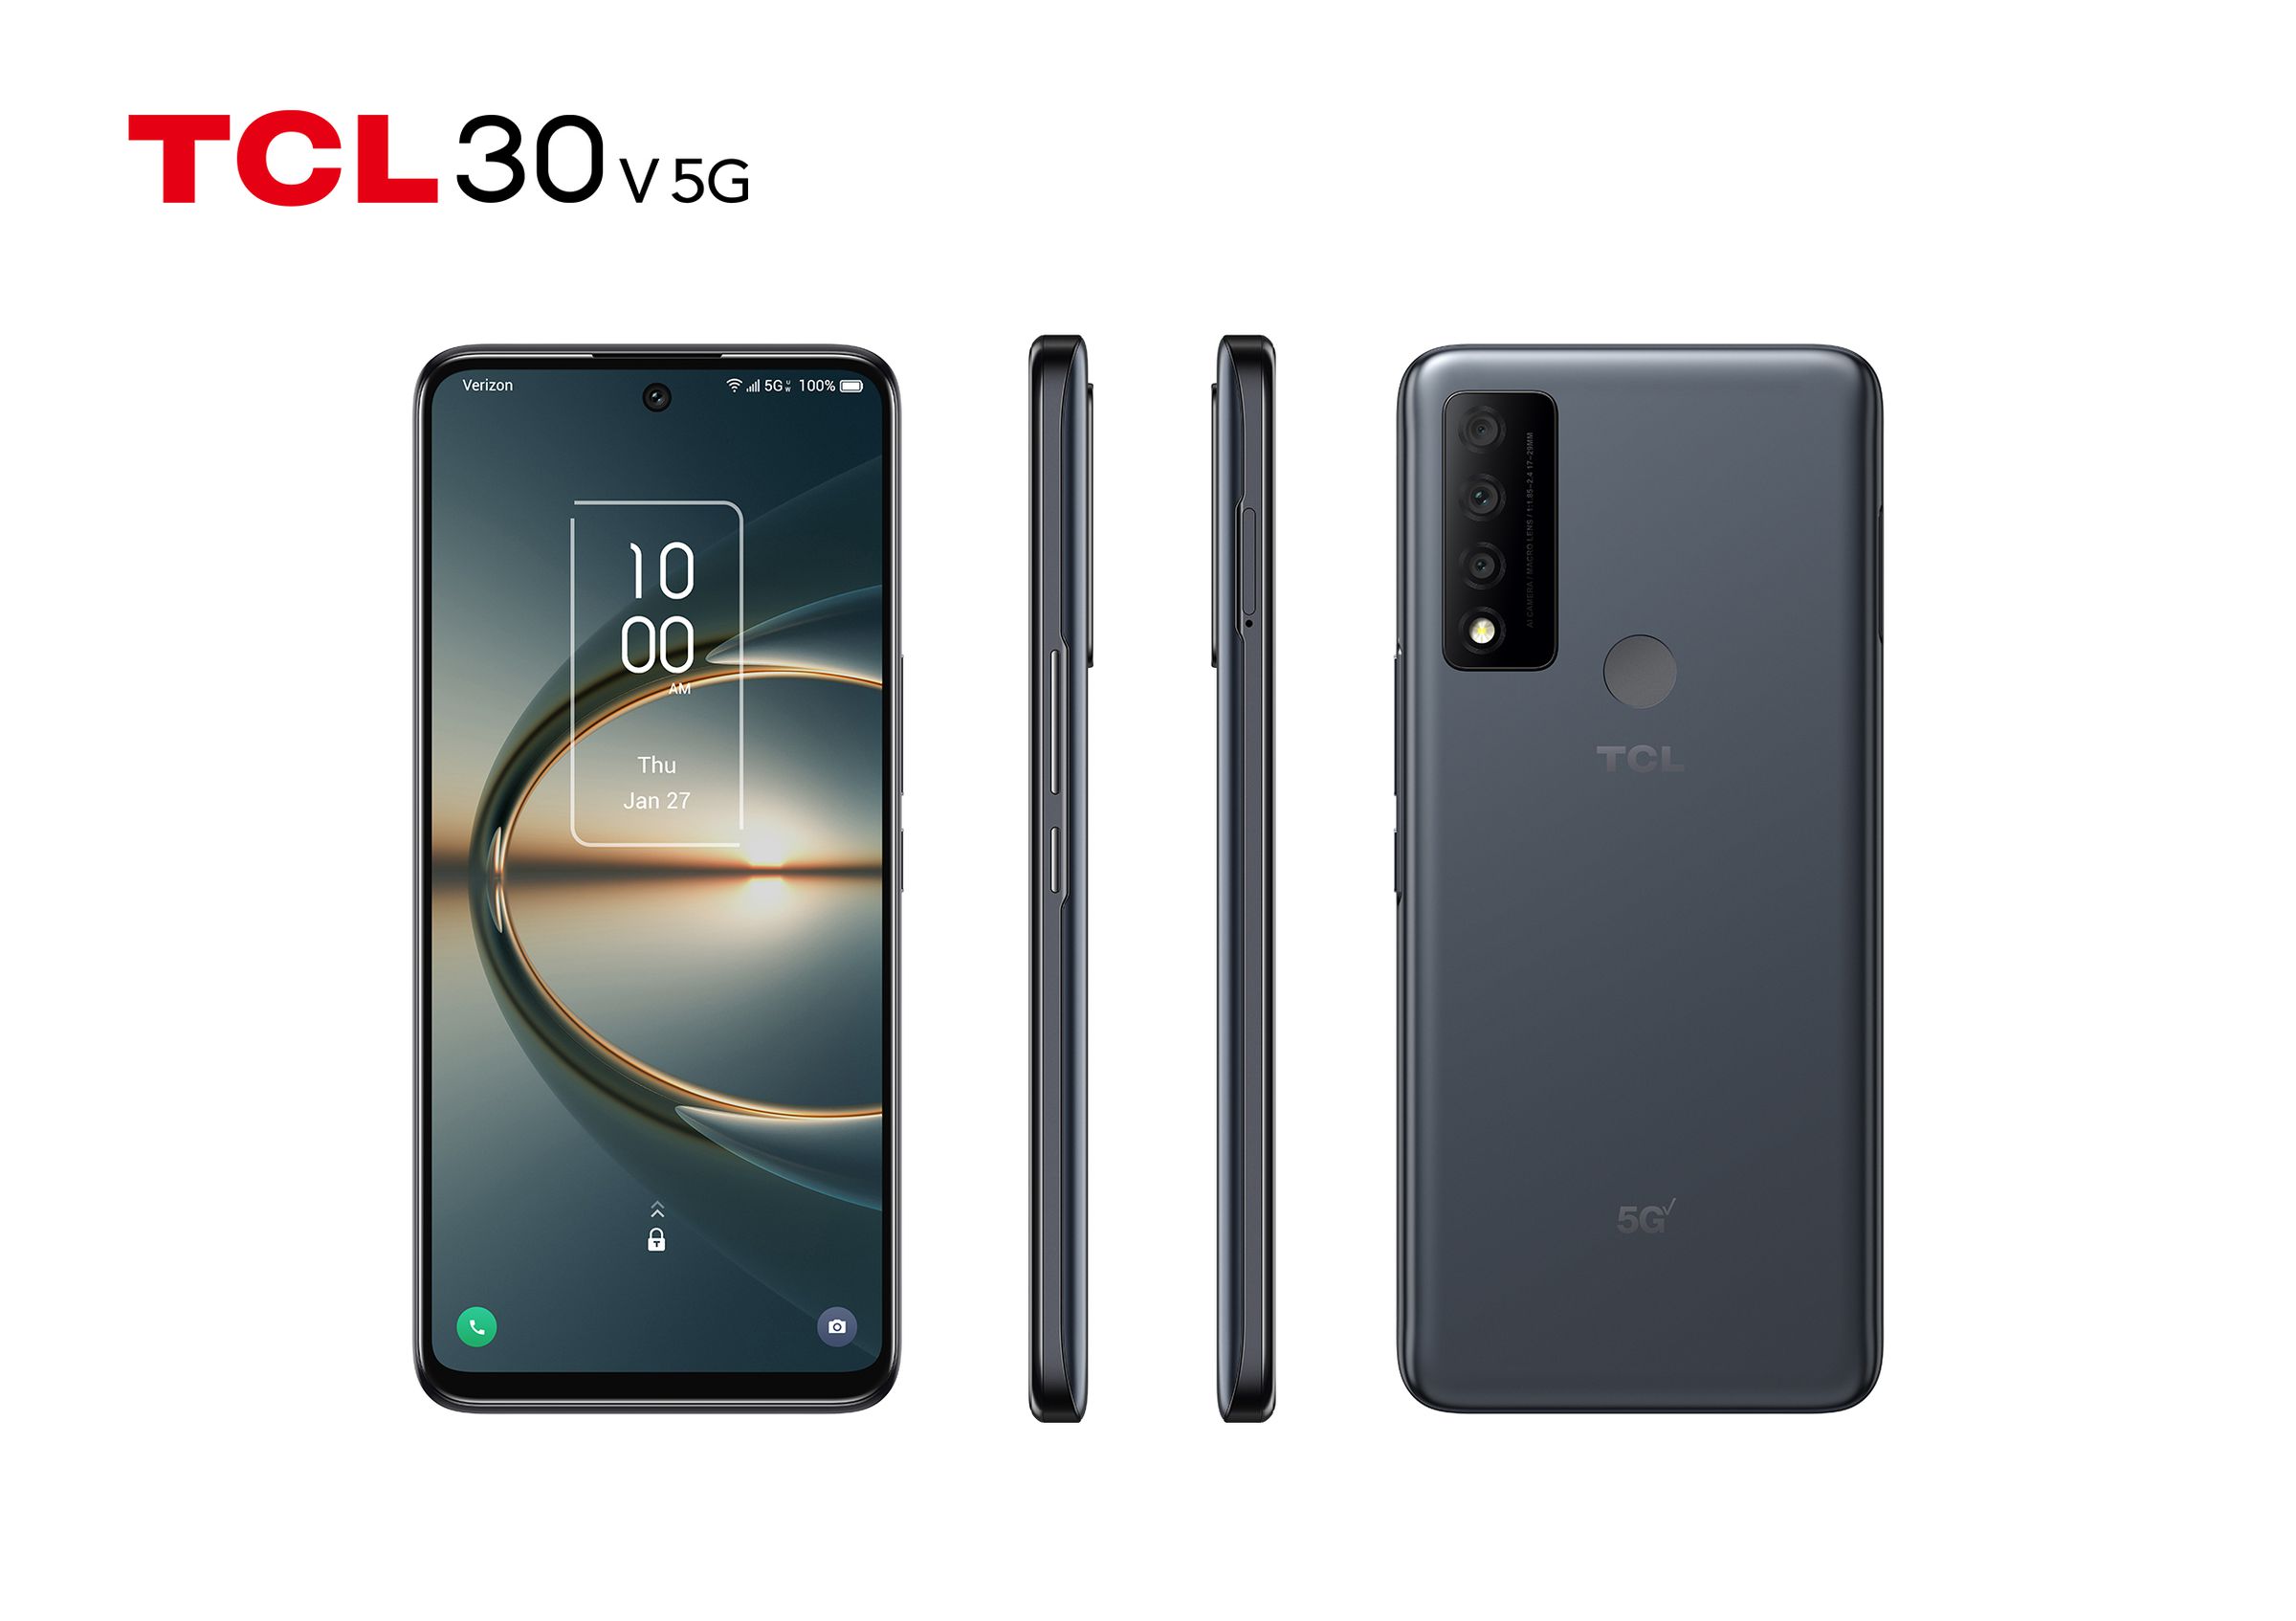 The 30 V 5G is a Verizon exclusive with all flavors of 5G connectivity.